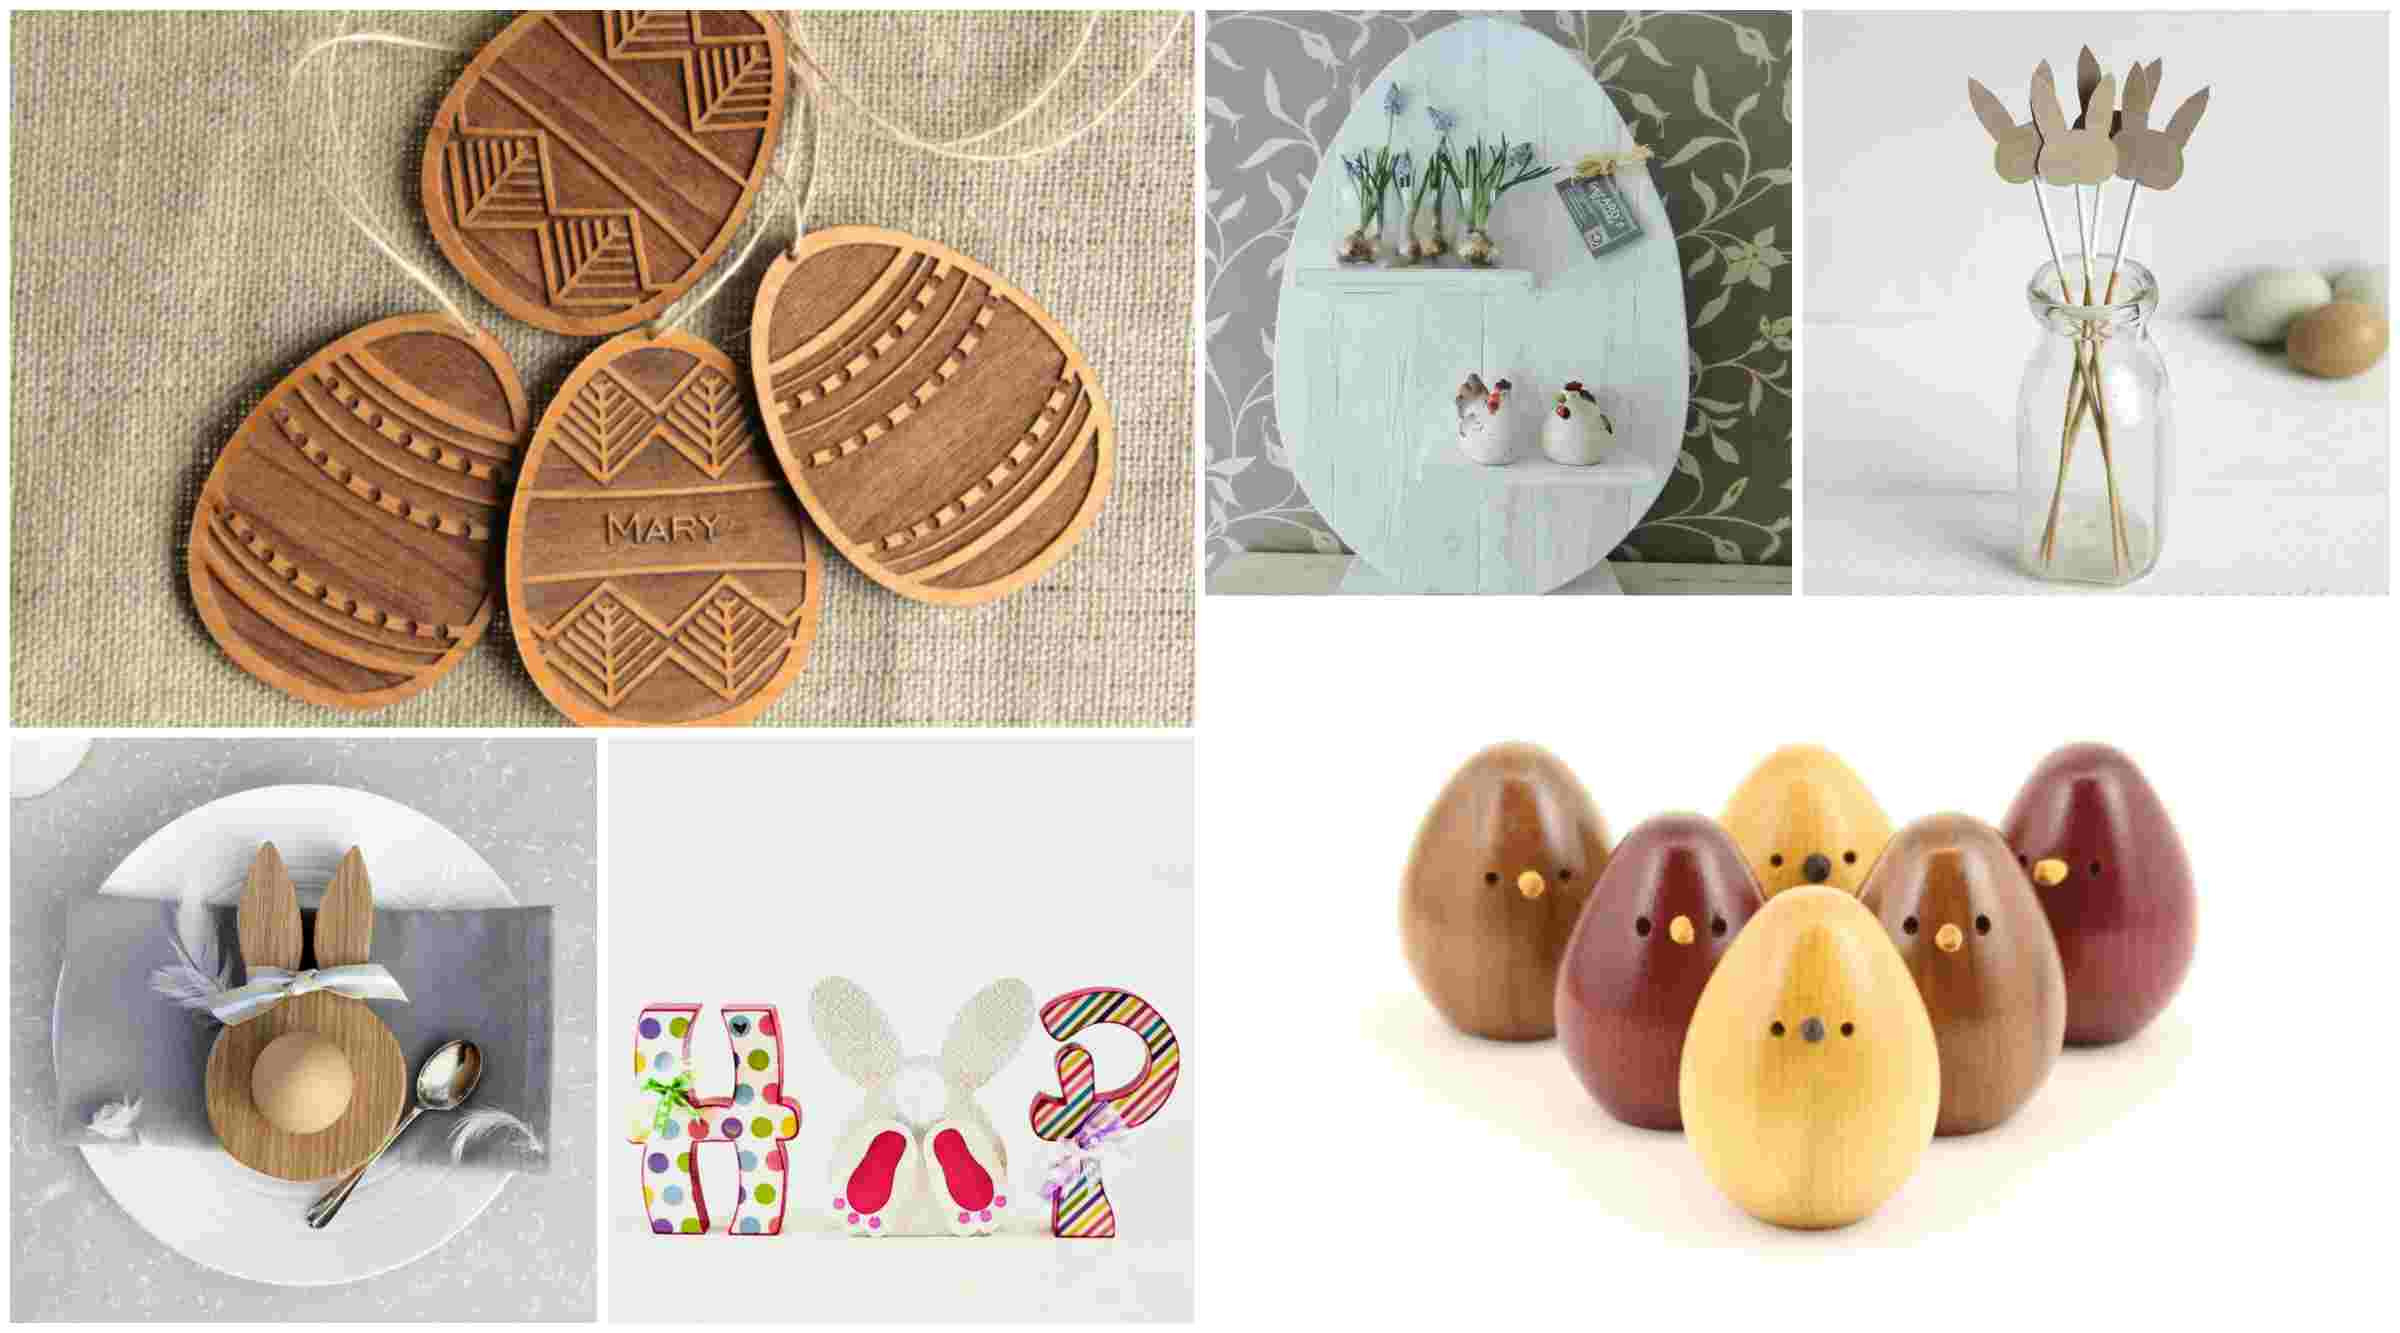 Wonderful Easter Decorations Made Of Wood My Desired Home